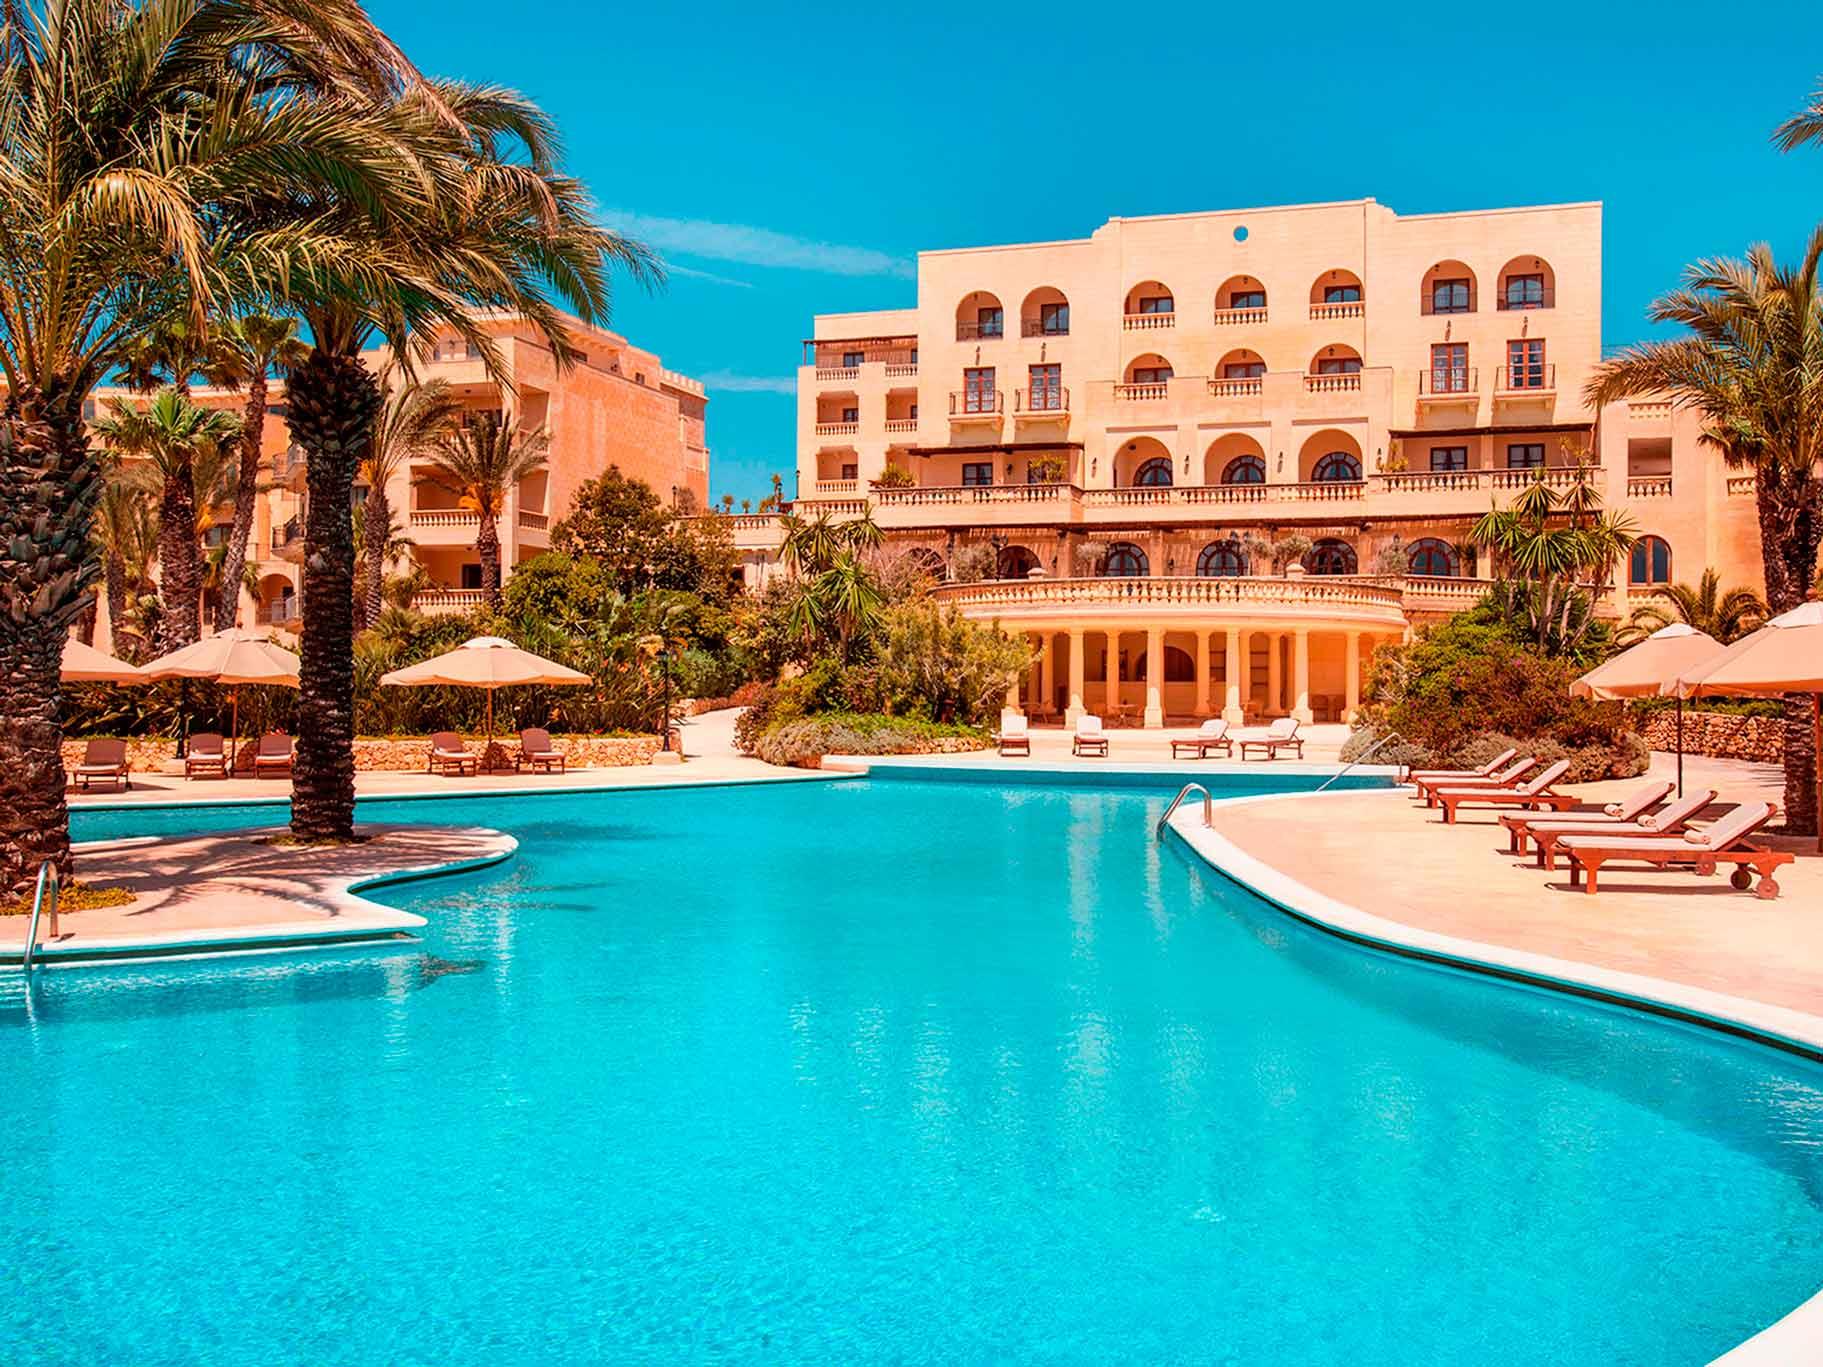 Kempinski San Lawrenz Hotel Gozo FAQ 2017, What facilities are there in Kempinski San Lawrenz Hotel Gozo 2017, What Languages Spoken are Supported in Kempinski San Lawrenz Hotel Gozo 2017, Which payment cards are accepted in Kempinski San Lawrenz Hotel Gozo , Gozo Kempinski San Lawrenz Hotel room facilities and services Q&A 2017, Gozo Kempinski San Lawrenz Hotel online booking services 2017, Gozo Kempinski San Lawrenz Hotel address 2017, Gozo Kempinski San Lawrenz Hotel telephone number 2017,Gozo Kempinski San Lawrenz Hotel map 2017, Gozo Kempinski San Lawrenz Hotel traffic guide 2017, how to go Gozo Kempinski San Lawrenz Hotel, Gozo Kempinski San Lawrenz Hotel booking online 2017, Gozo Kempinski San Lawrenz Hotel room types 2017.